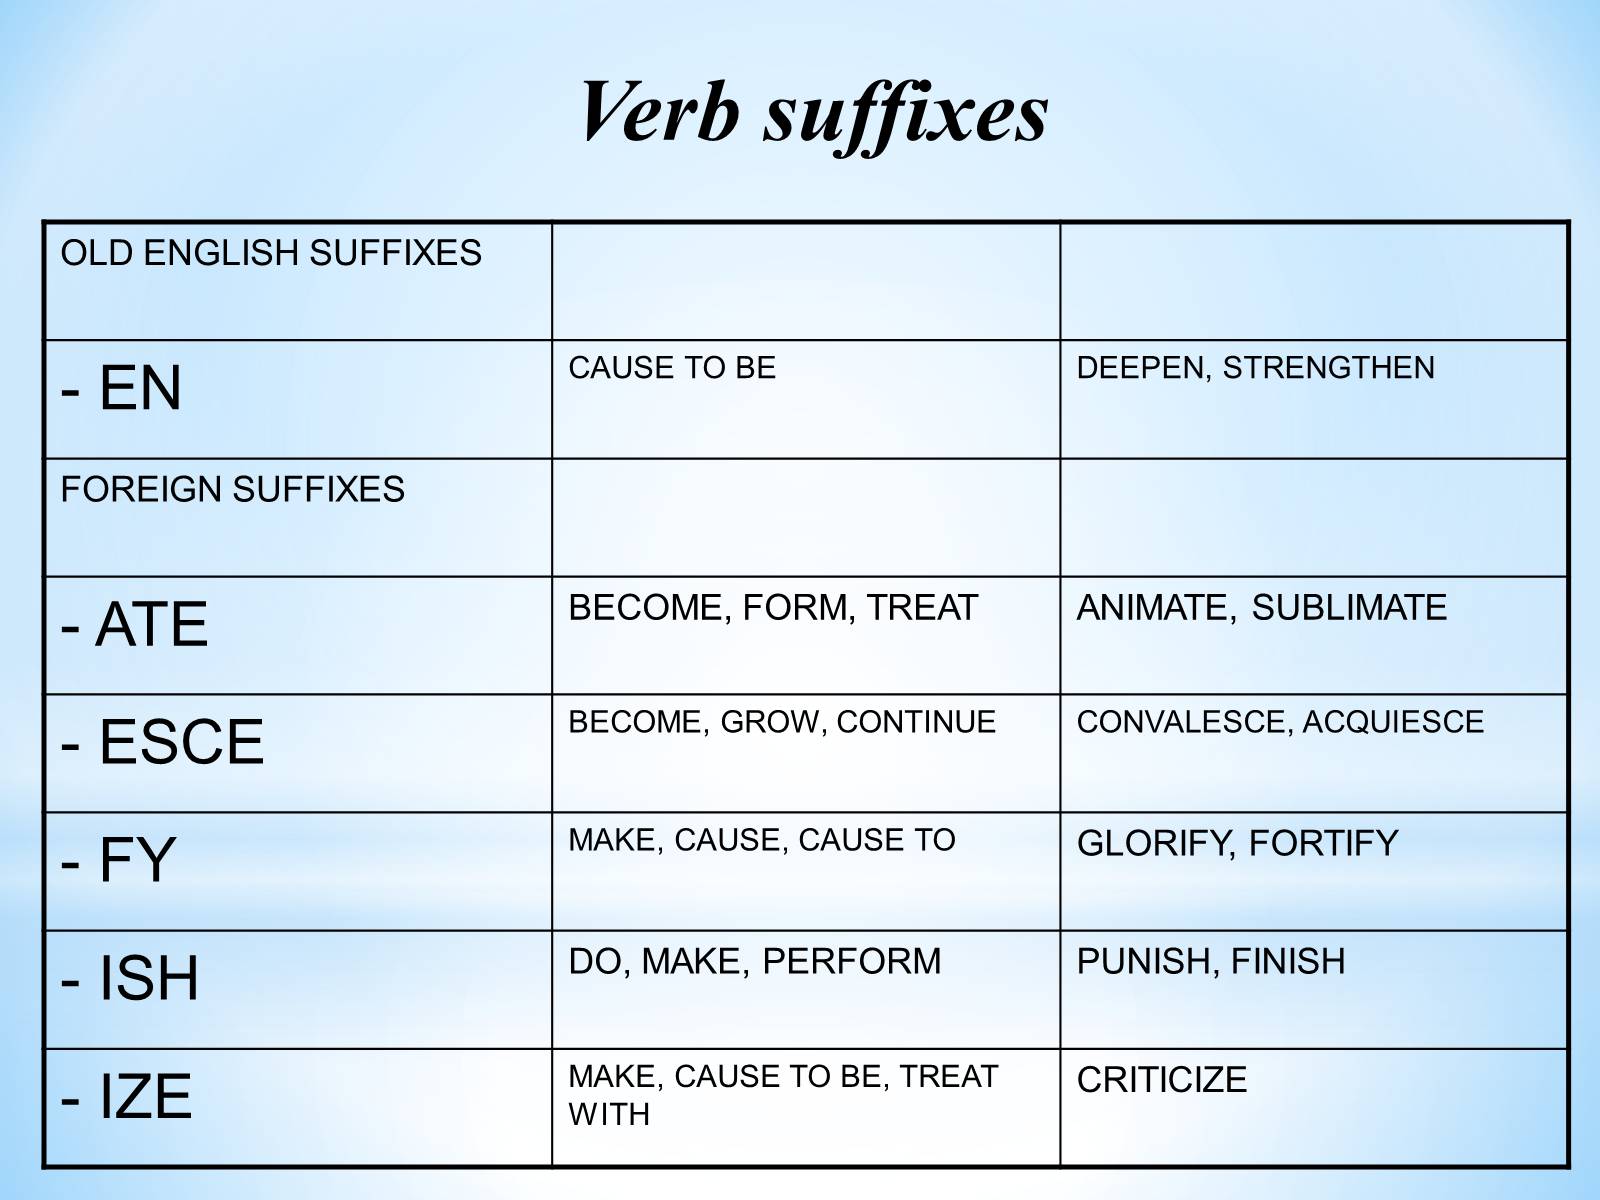 Word formation that. Suffixes of verbs таблица. Verb forming suffixes. Verb suffixes in English. Verbs суффиксы.